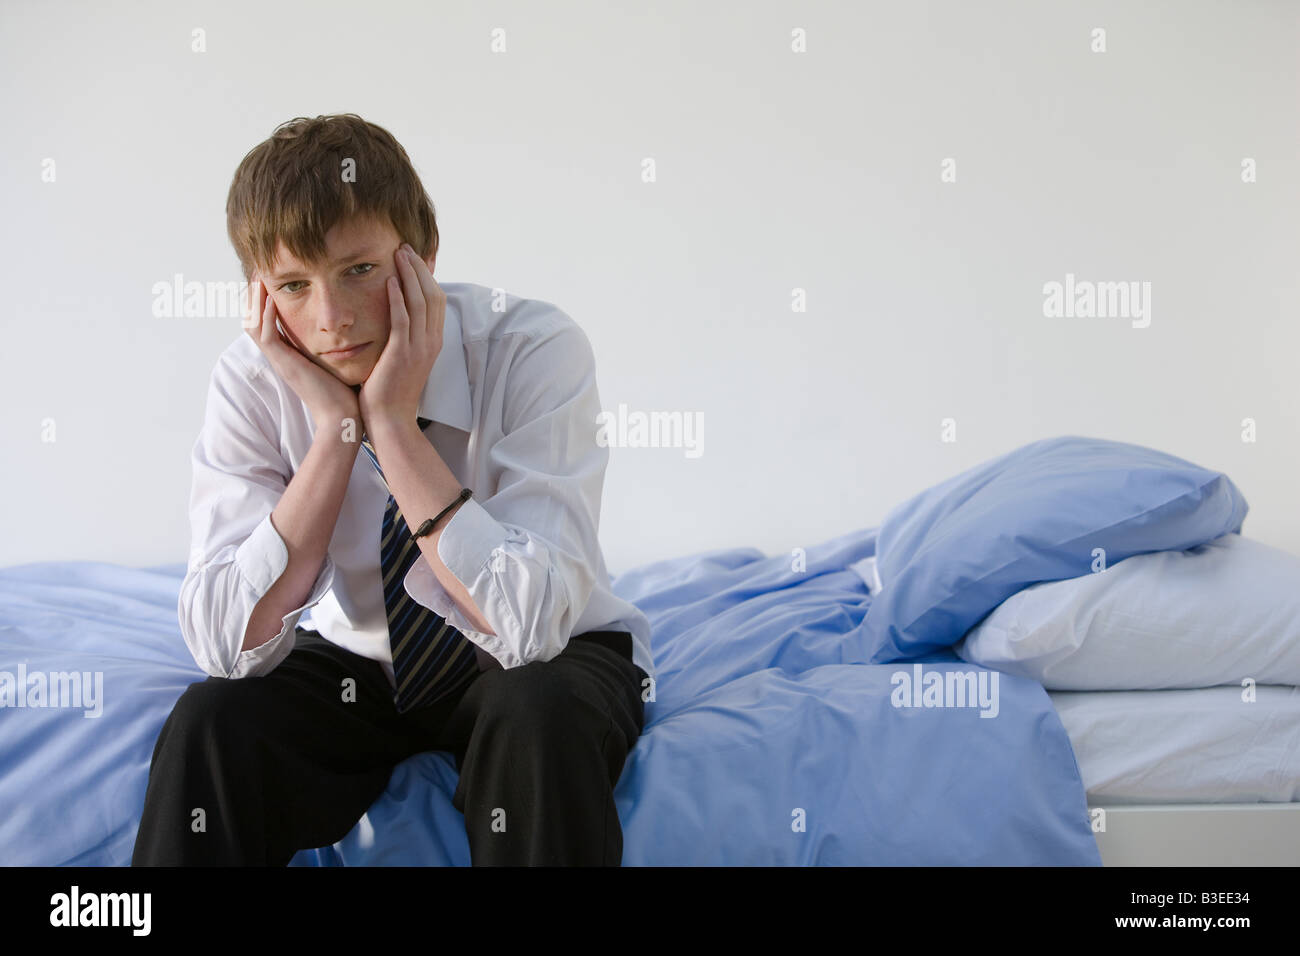 Boys Sitting On Bed Stock Photos & Boys Sitting On Bed Stock Images - Alamy